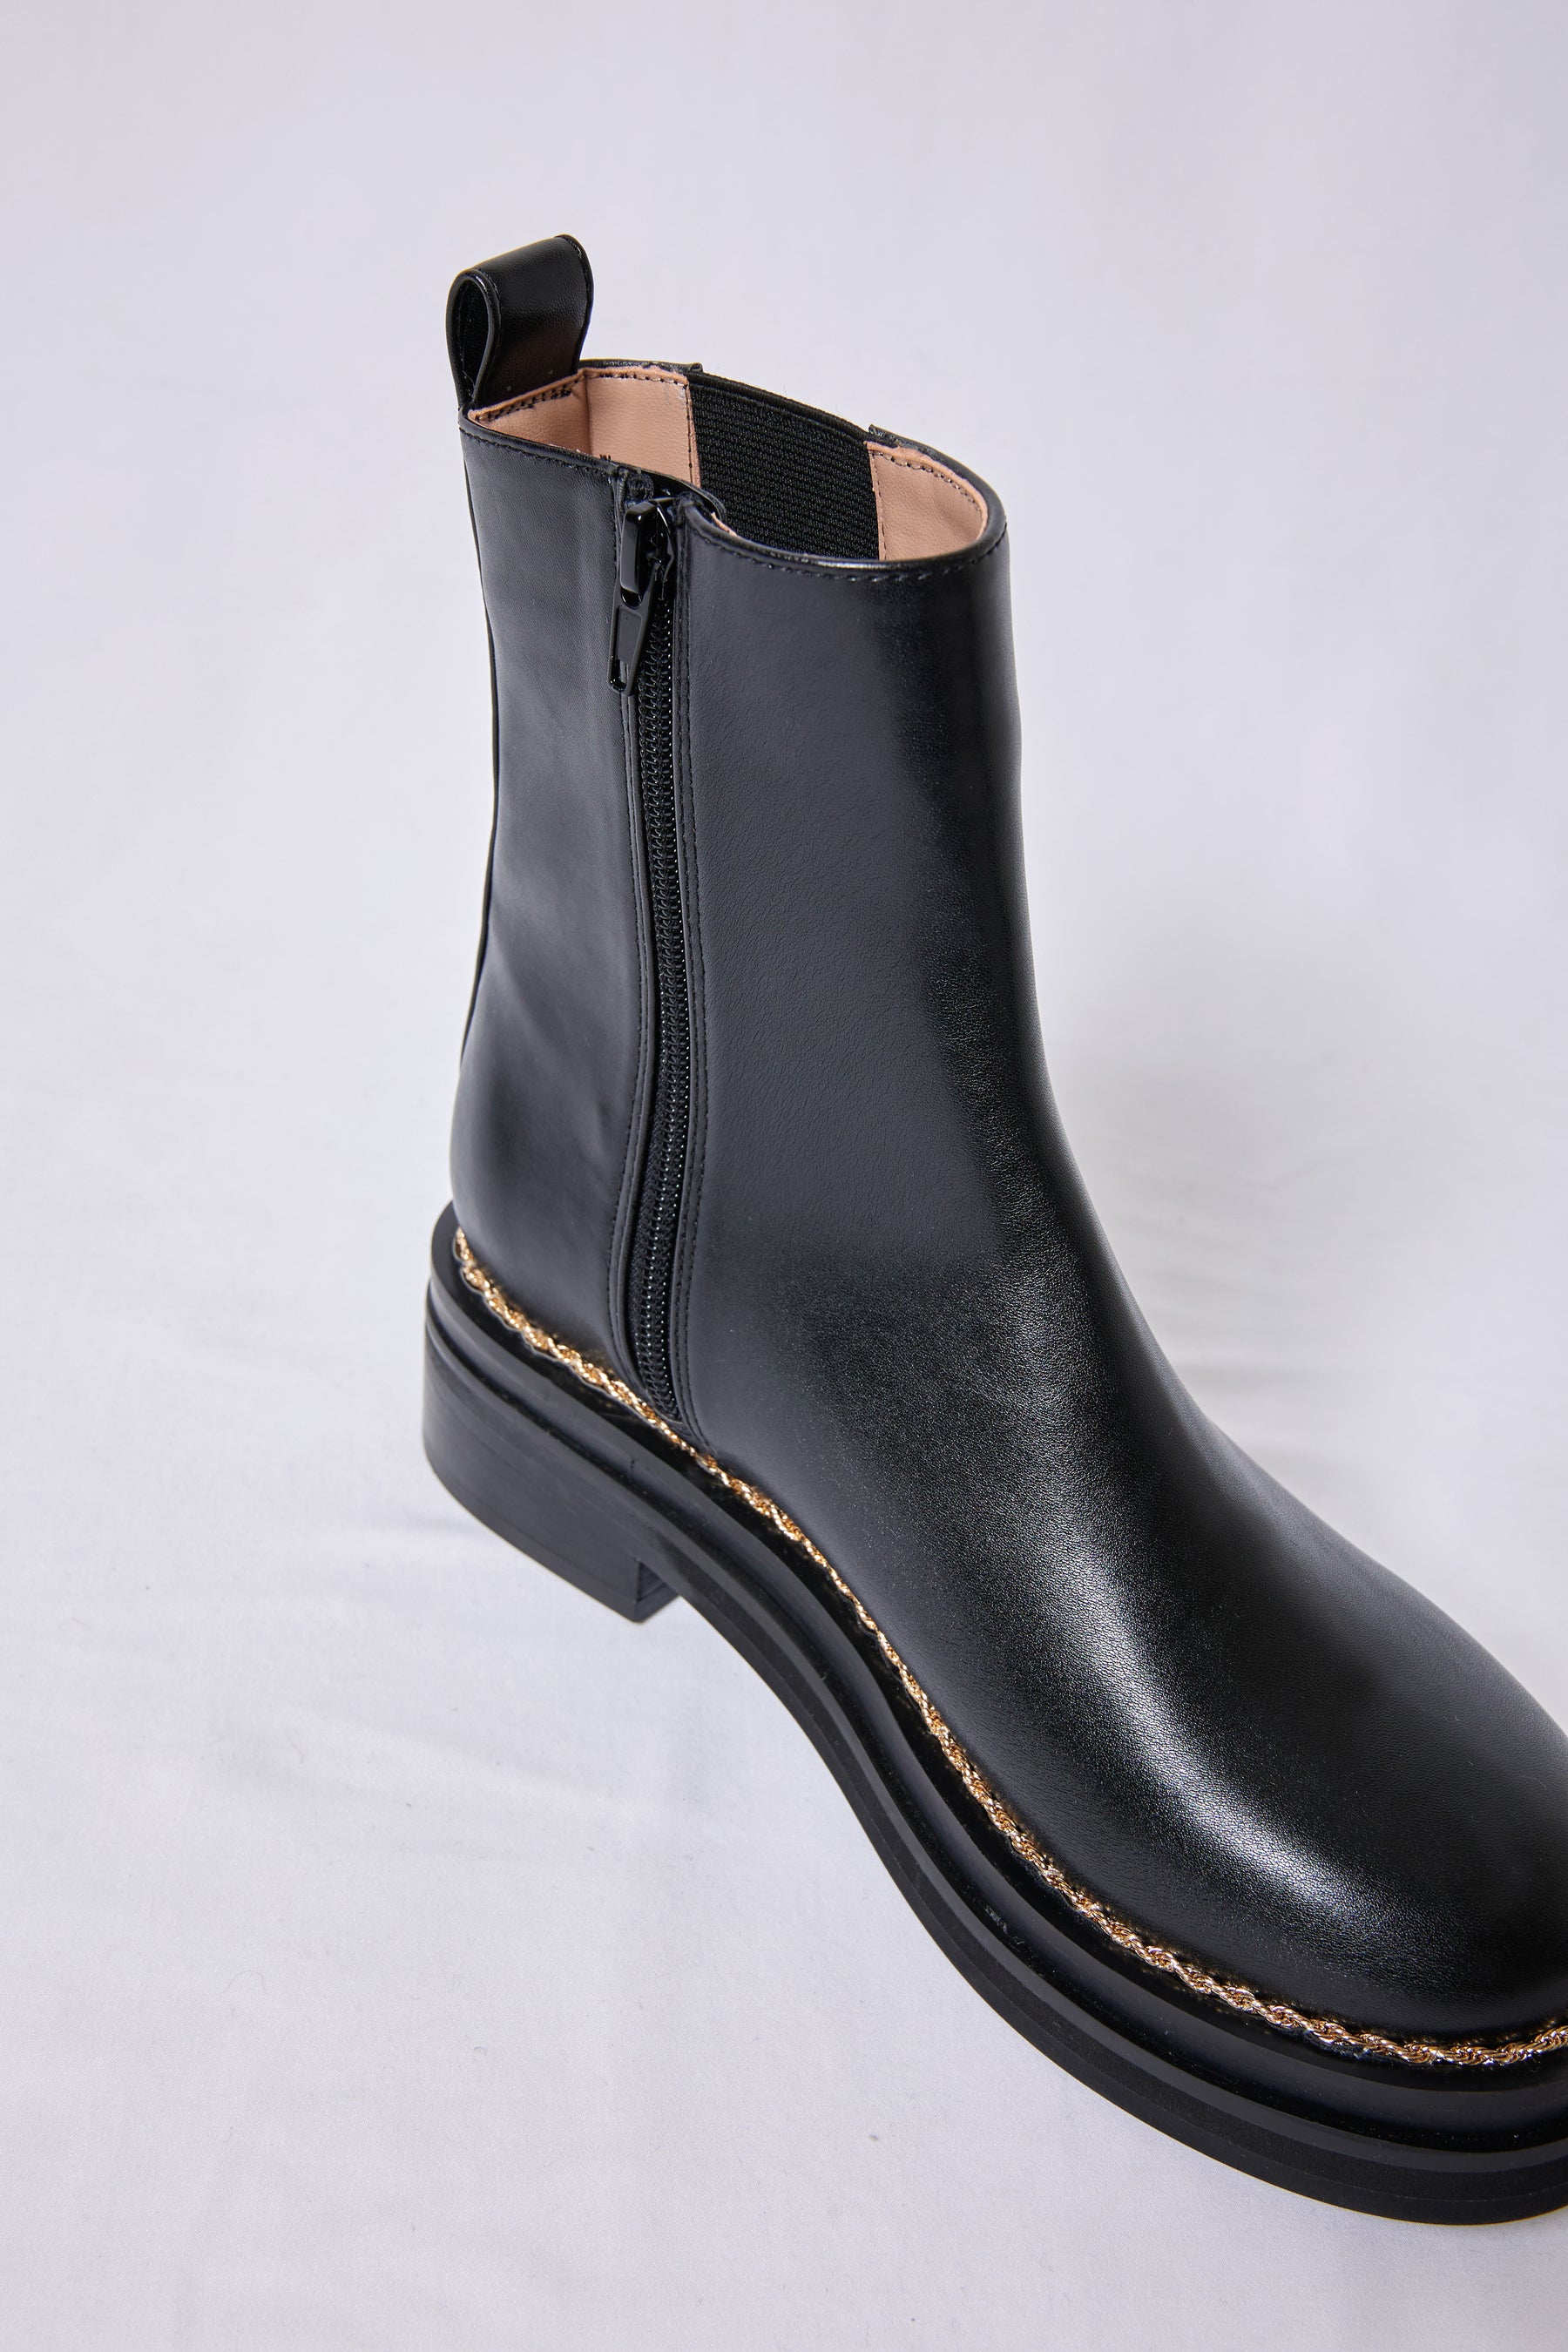 Chelsea Chain Ankle Boots 36 Her lip to243